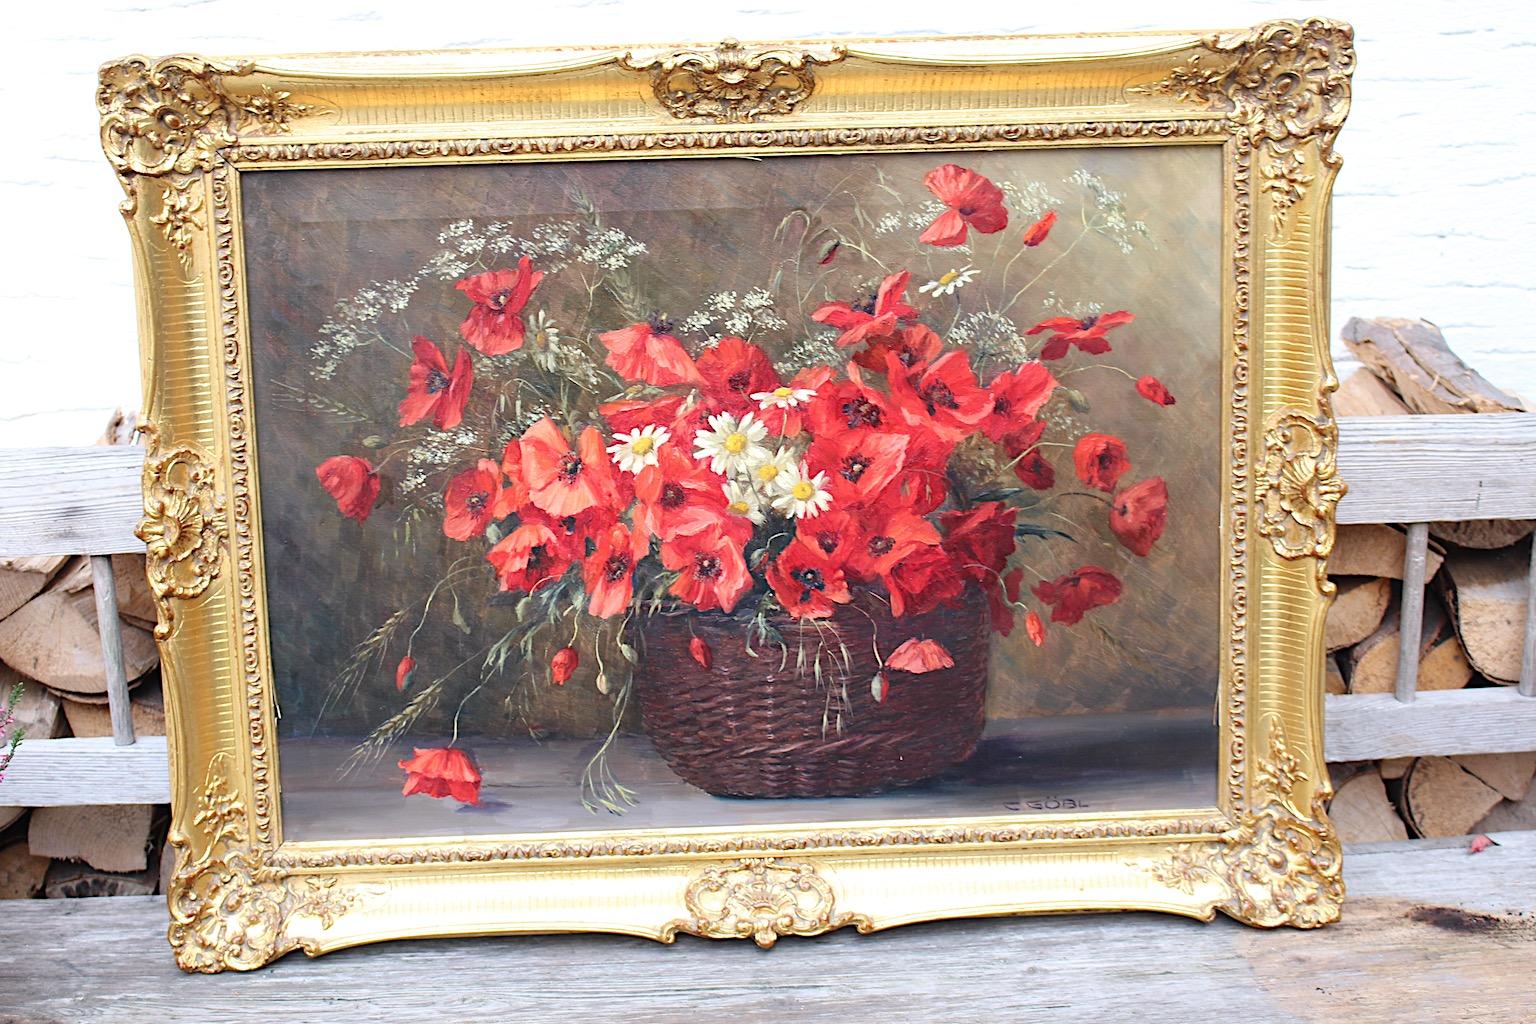 Art Deco Red Poppy Flowers in a Basket Painting Golden Frame Camilla Göbl 1930s Austria For Sale